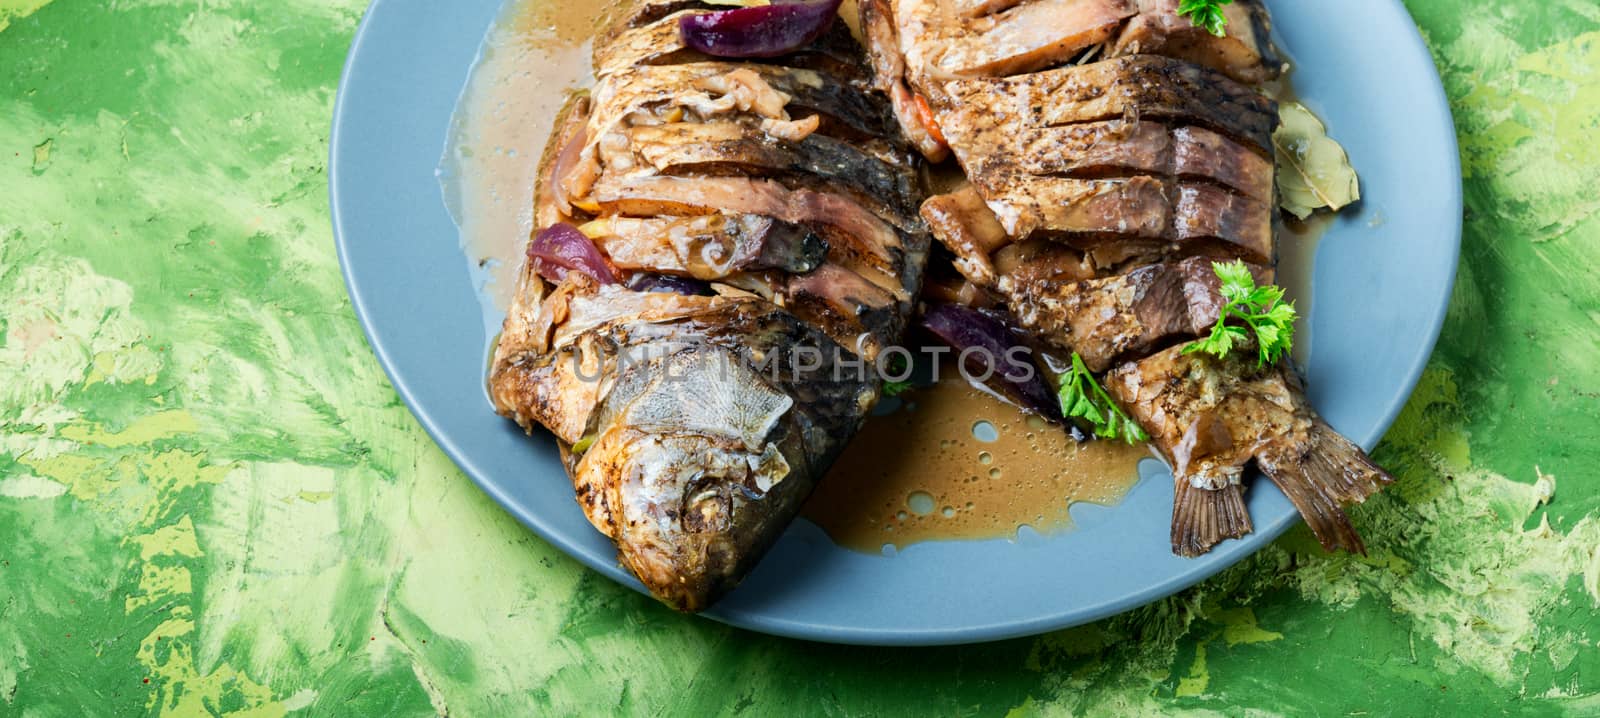 Grilled fish and spicy seafood sauce.Grilled fish with spices